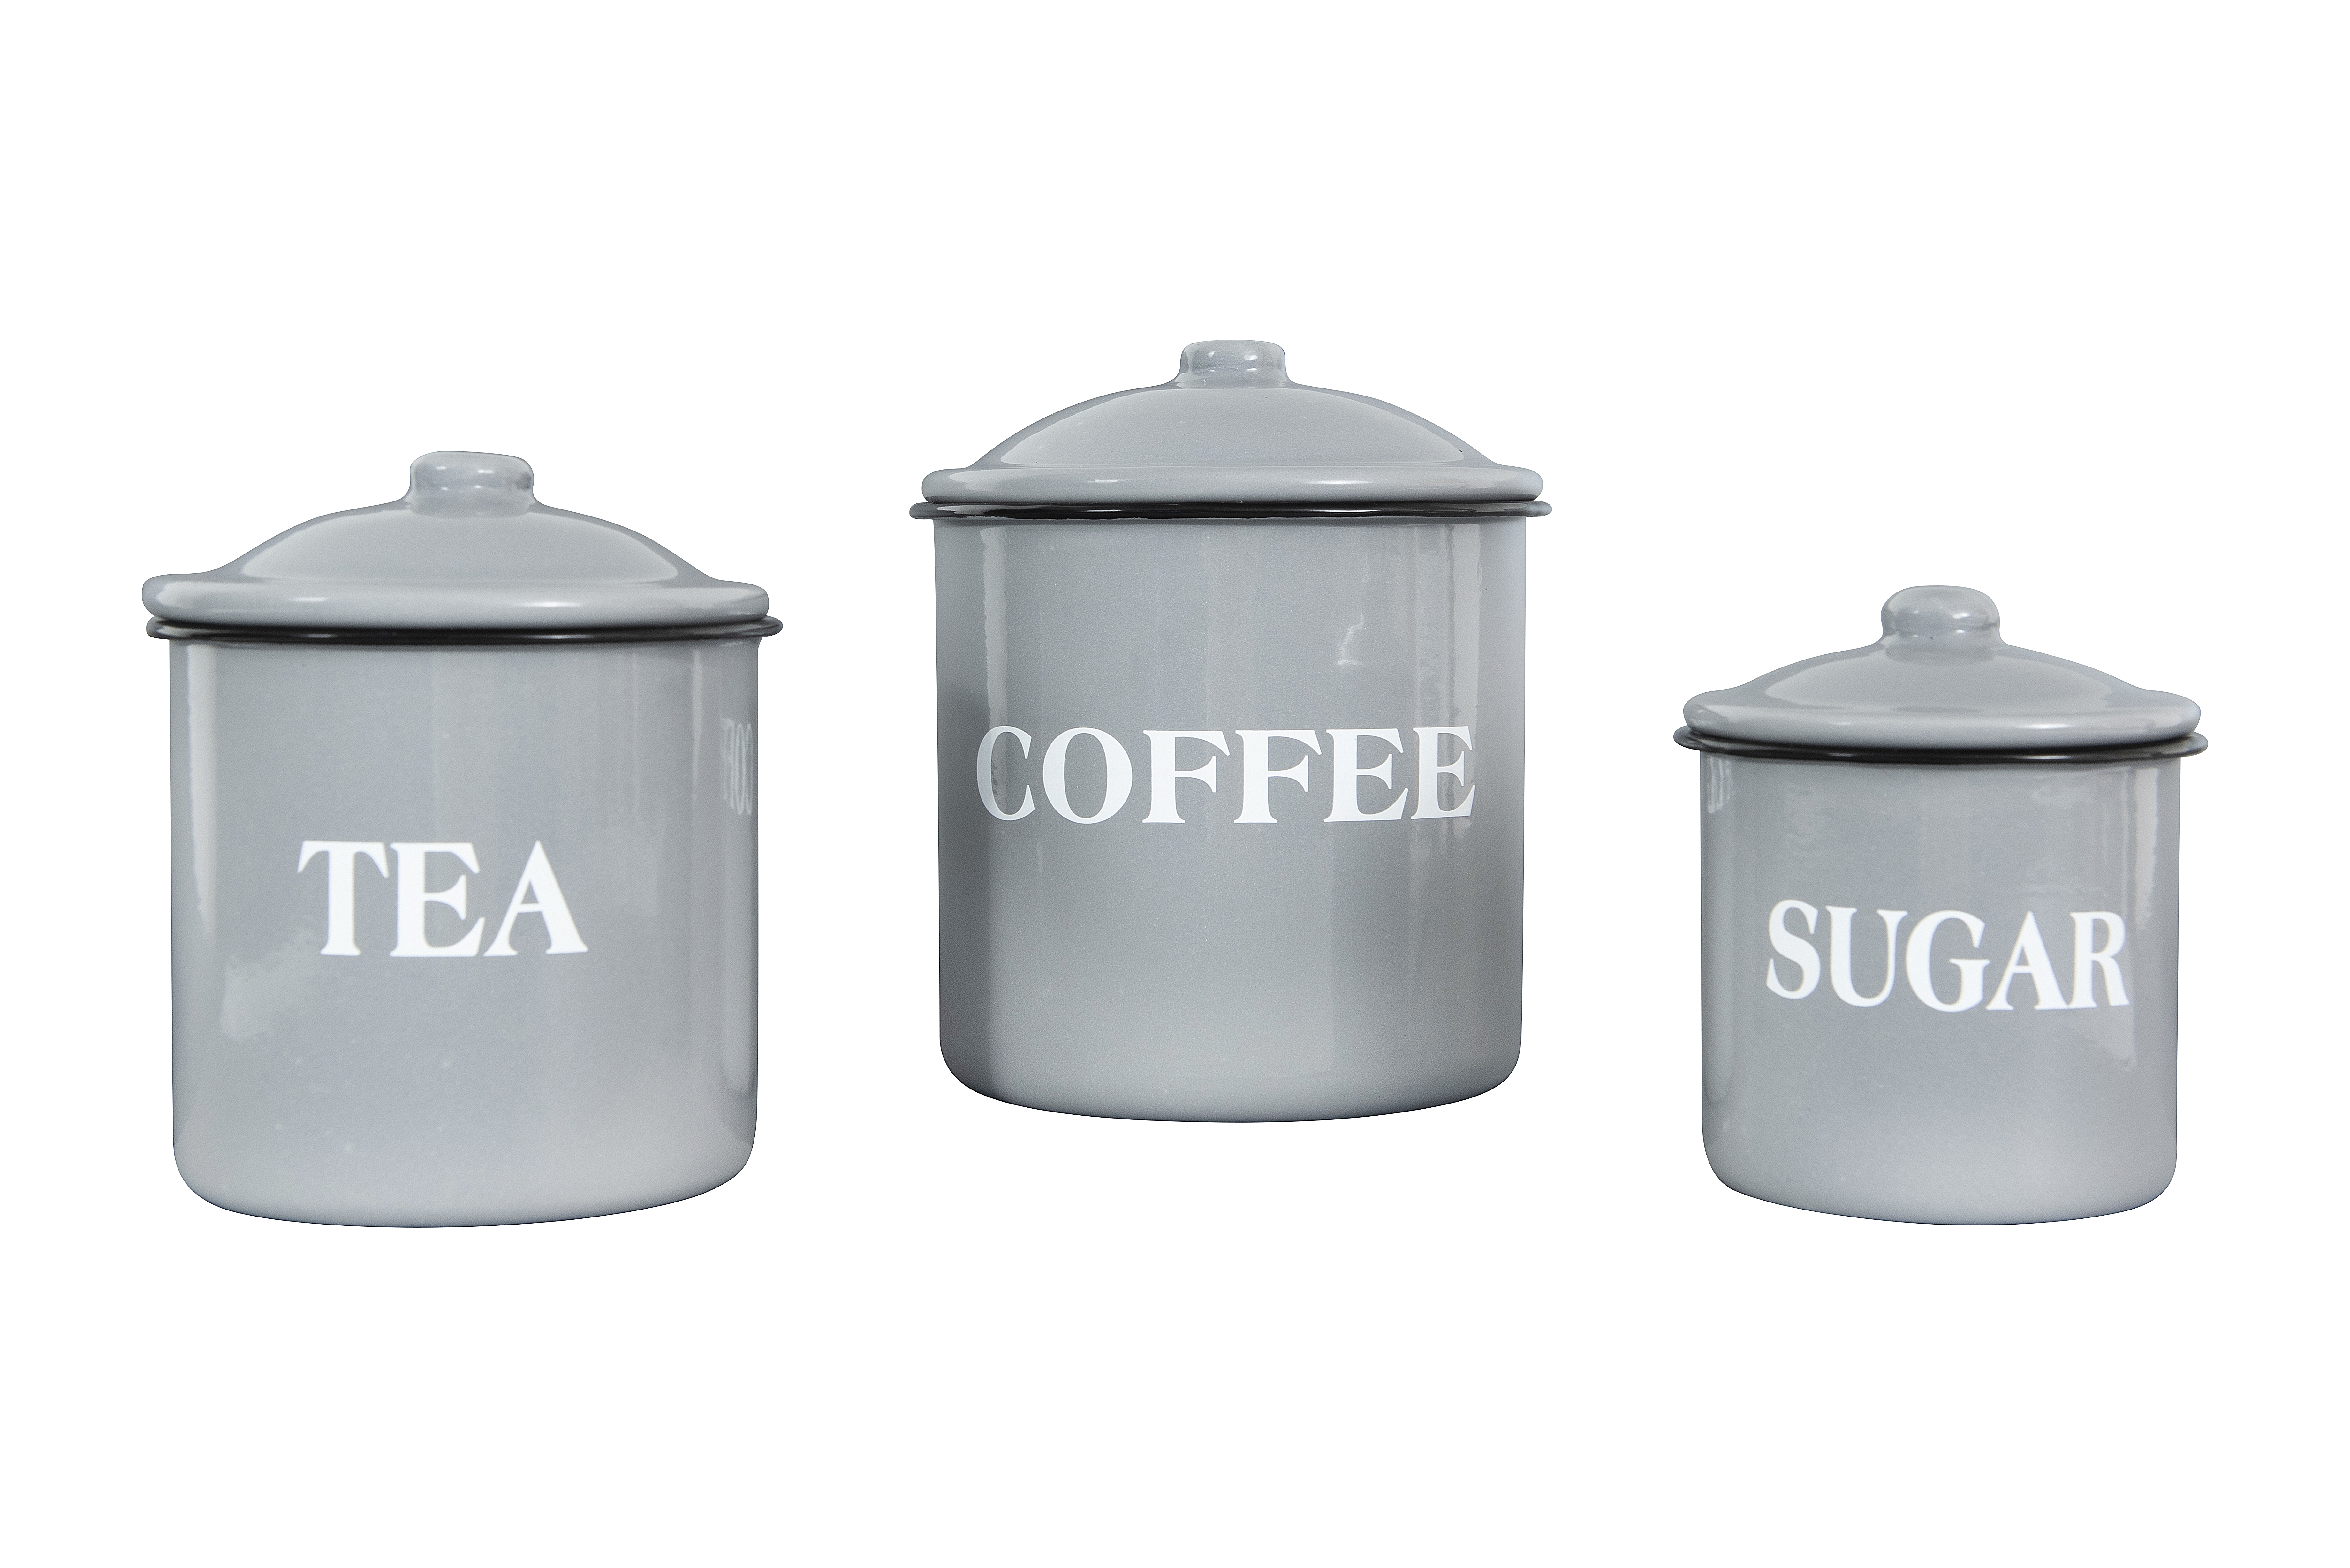 Metal Containers with Lids, "Coffee", "Tea", "Sugar" (Set of 3 Sizes/Designs) - Image 0